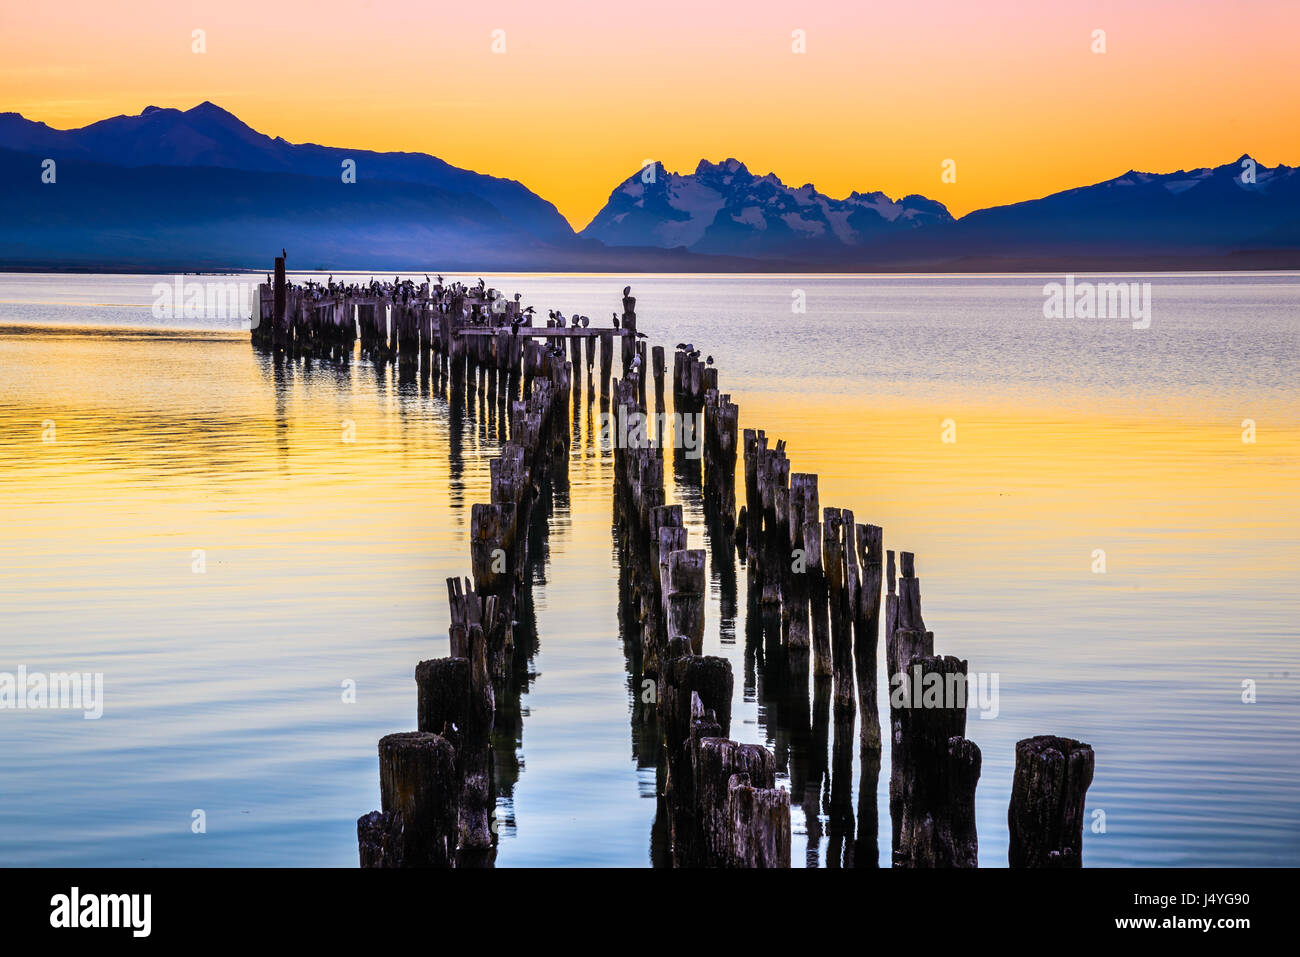 Puerto Natales, Chile - Gulf Almirante Montt, the Pacific Ocean waters in Chielan Patagonia, Magallanes Region. Stock Photo